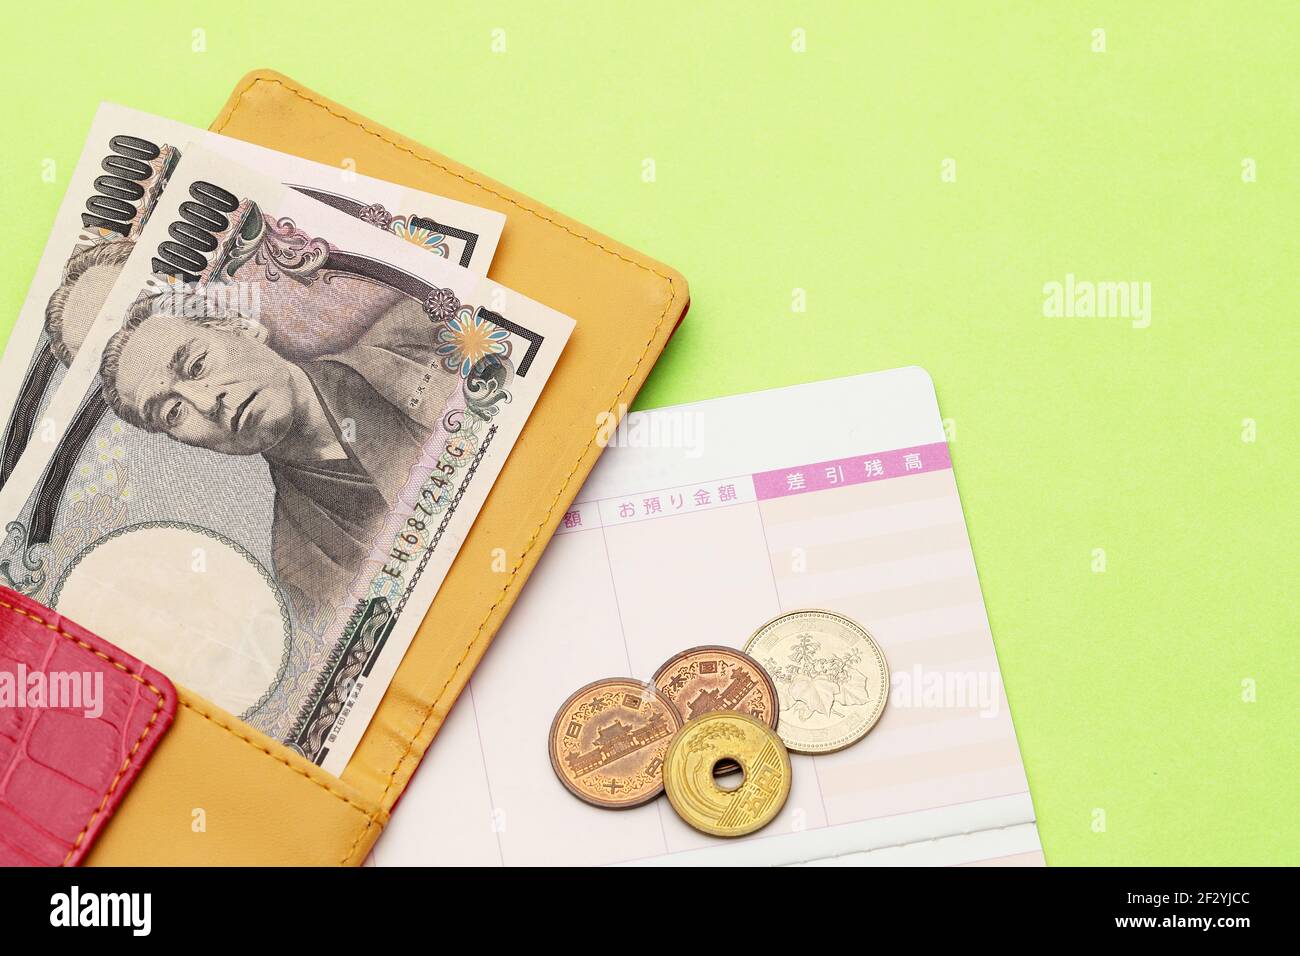 Leather wallet with ten thousand japanese yen and passbook. Stock Photo